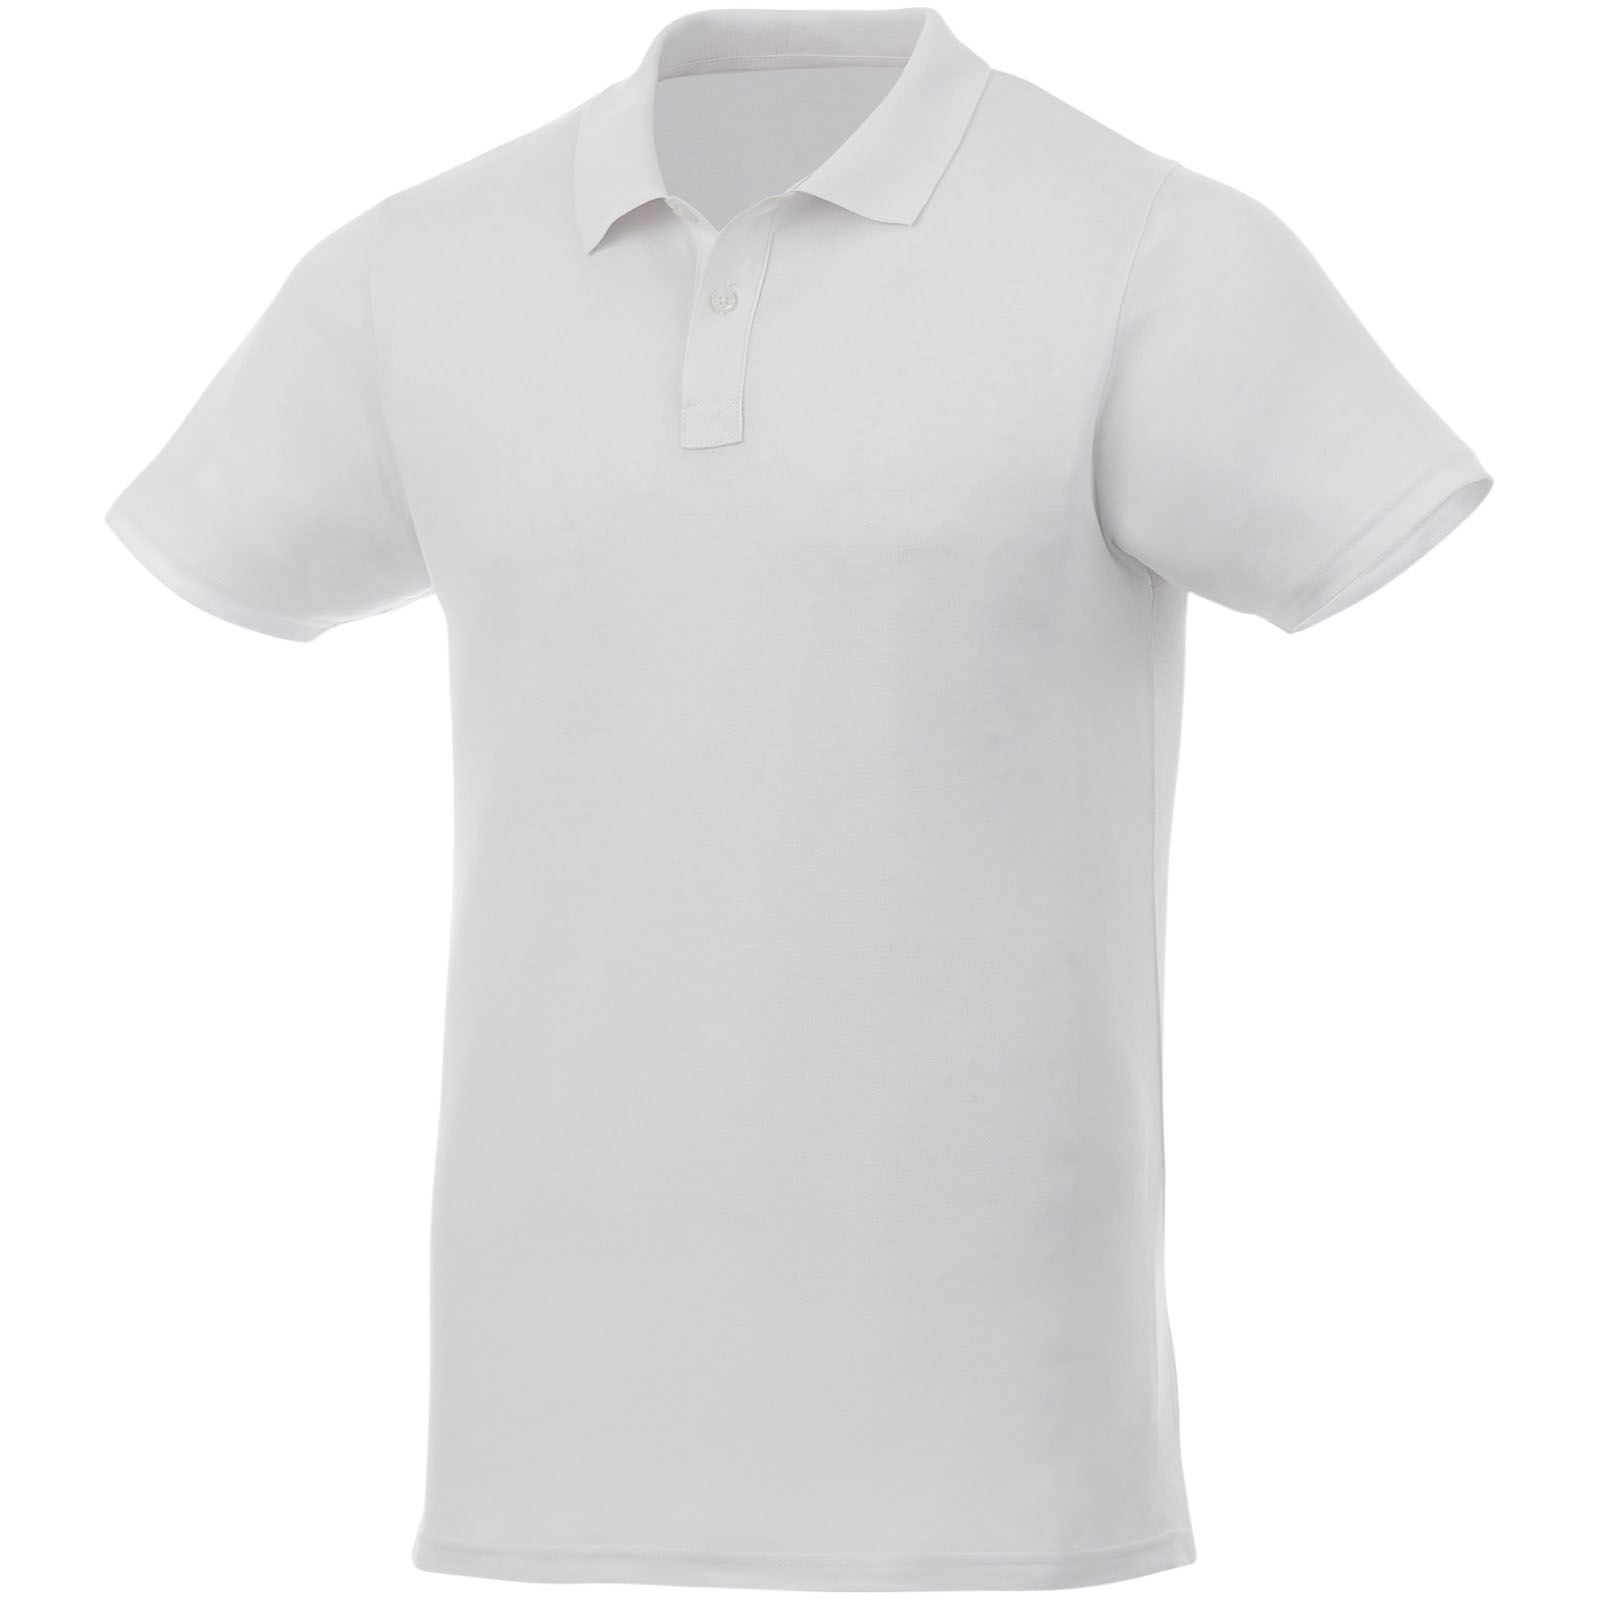 Polo-Shirt mit individuellem Label - Bad Wiessee